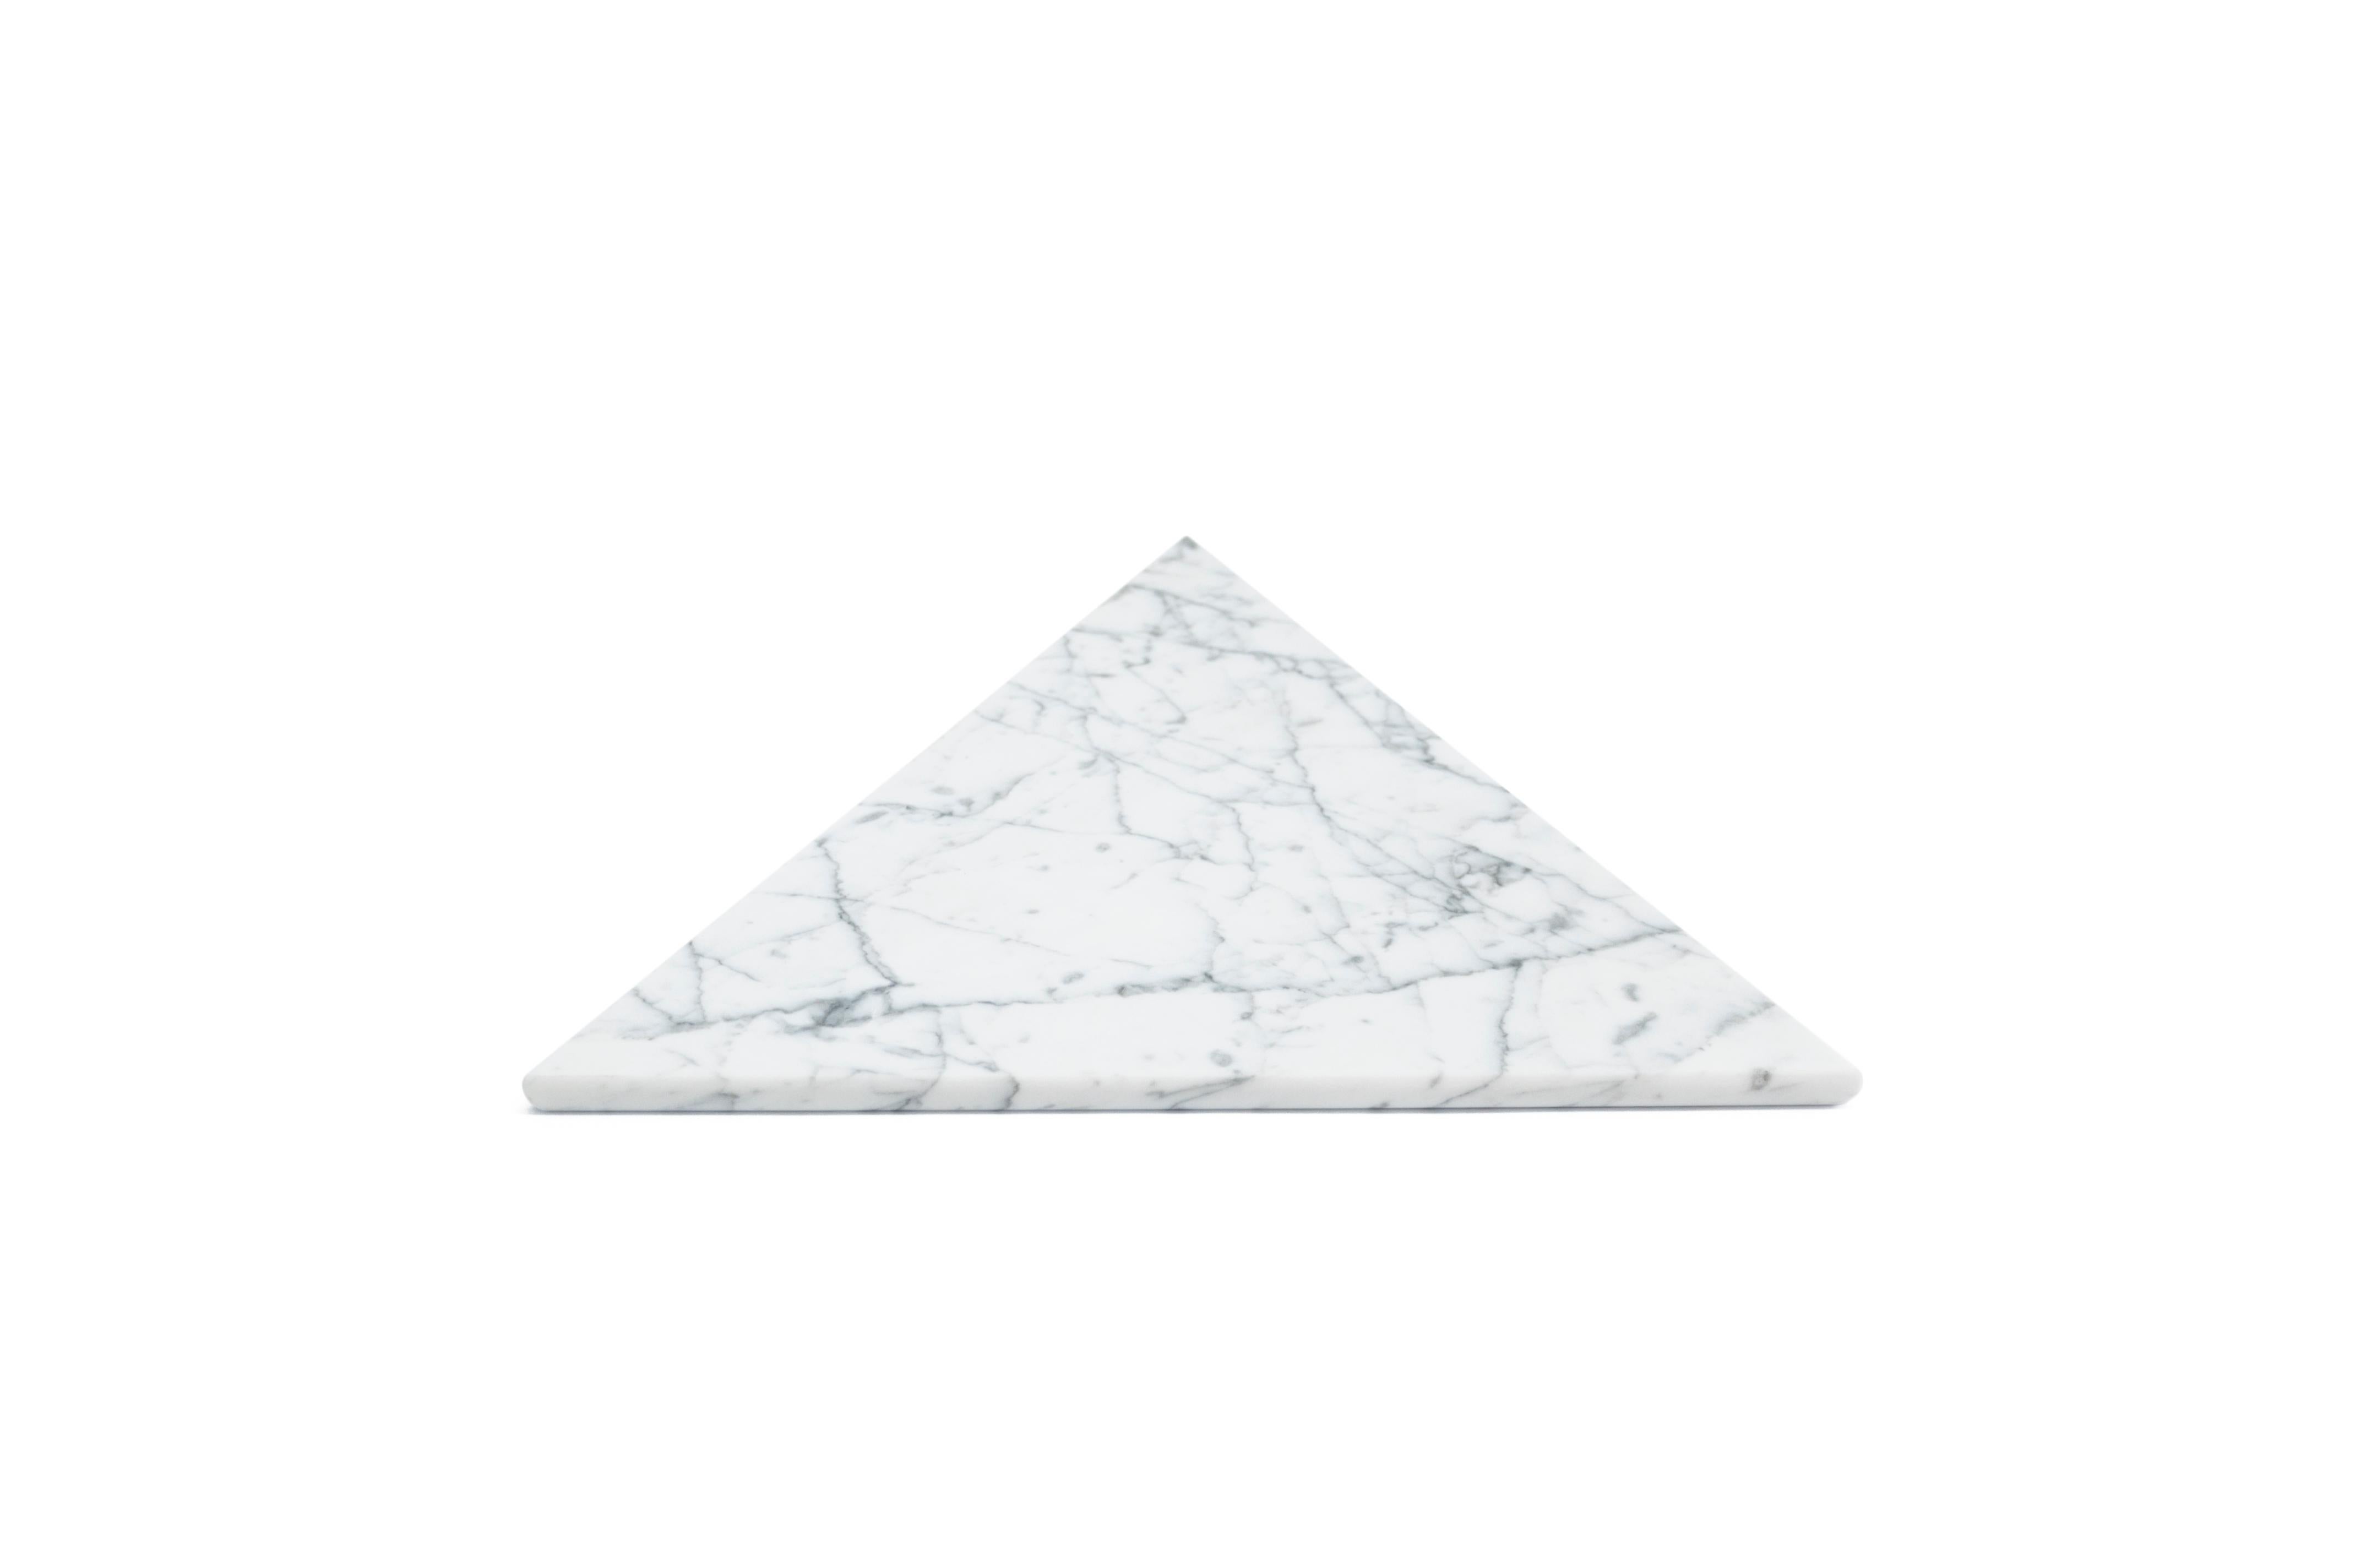 White Carrara marble cutting board and serving tray with triangular shape an cork underneath. Each piece is in a way unique (every marble block is different in veins and shades) and handmade by Italian artisans specialized over generations in